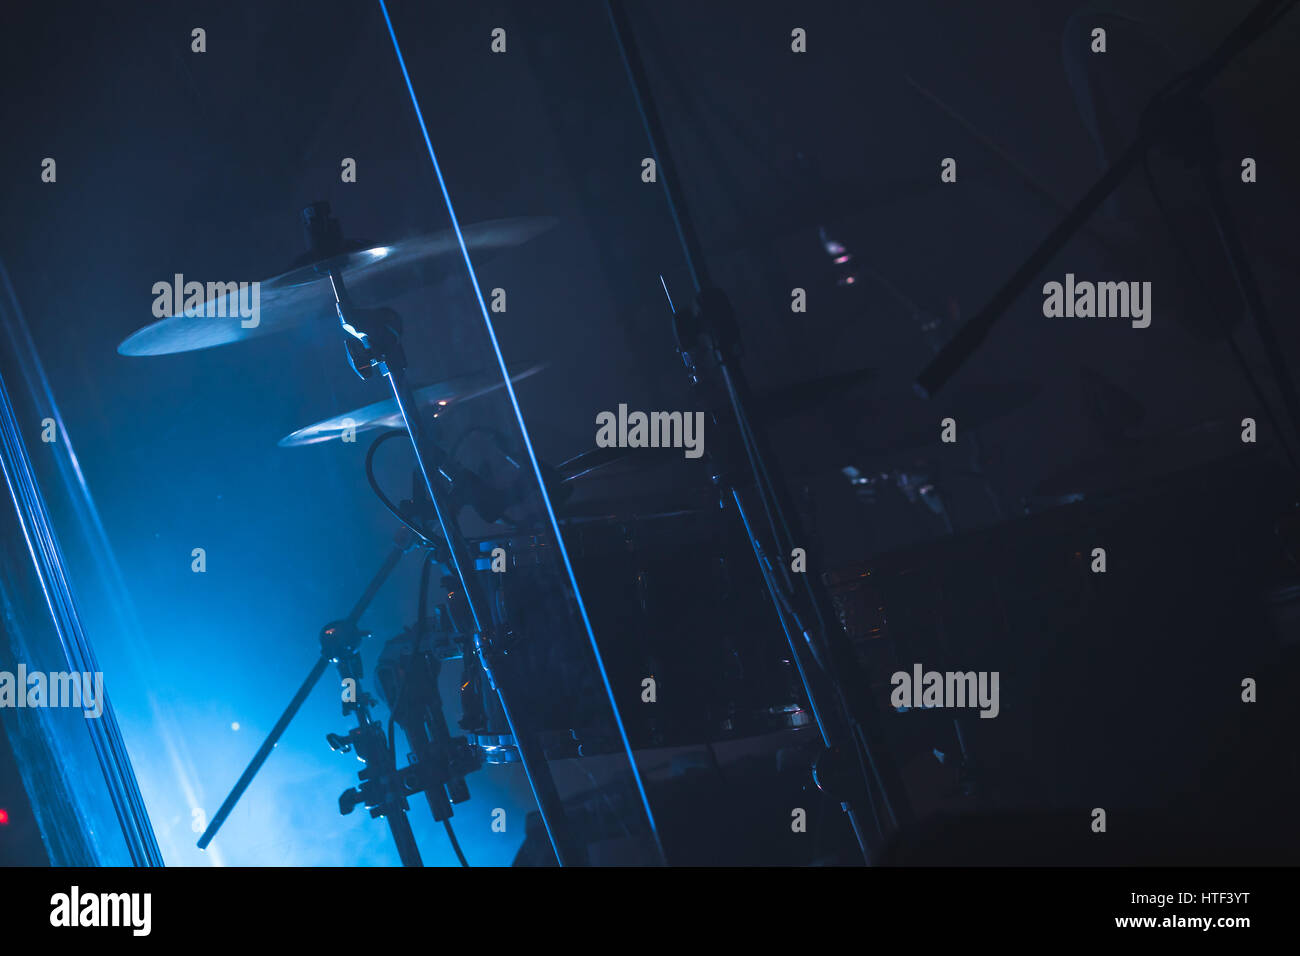 Blue mood musical photo background, rock drum set on dark stage with cymbals Stock Photo